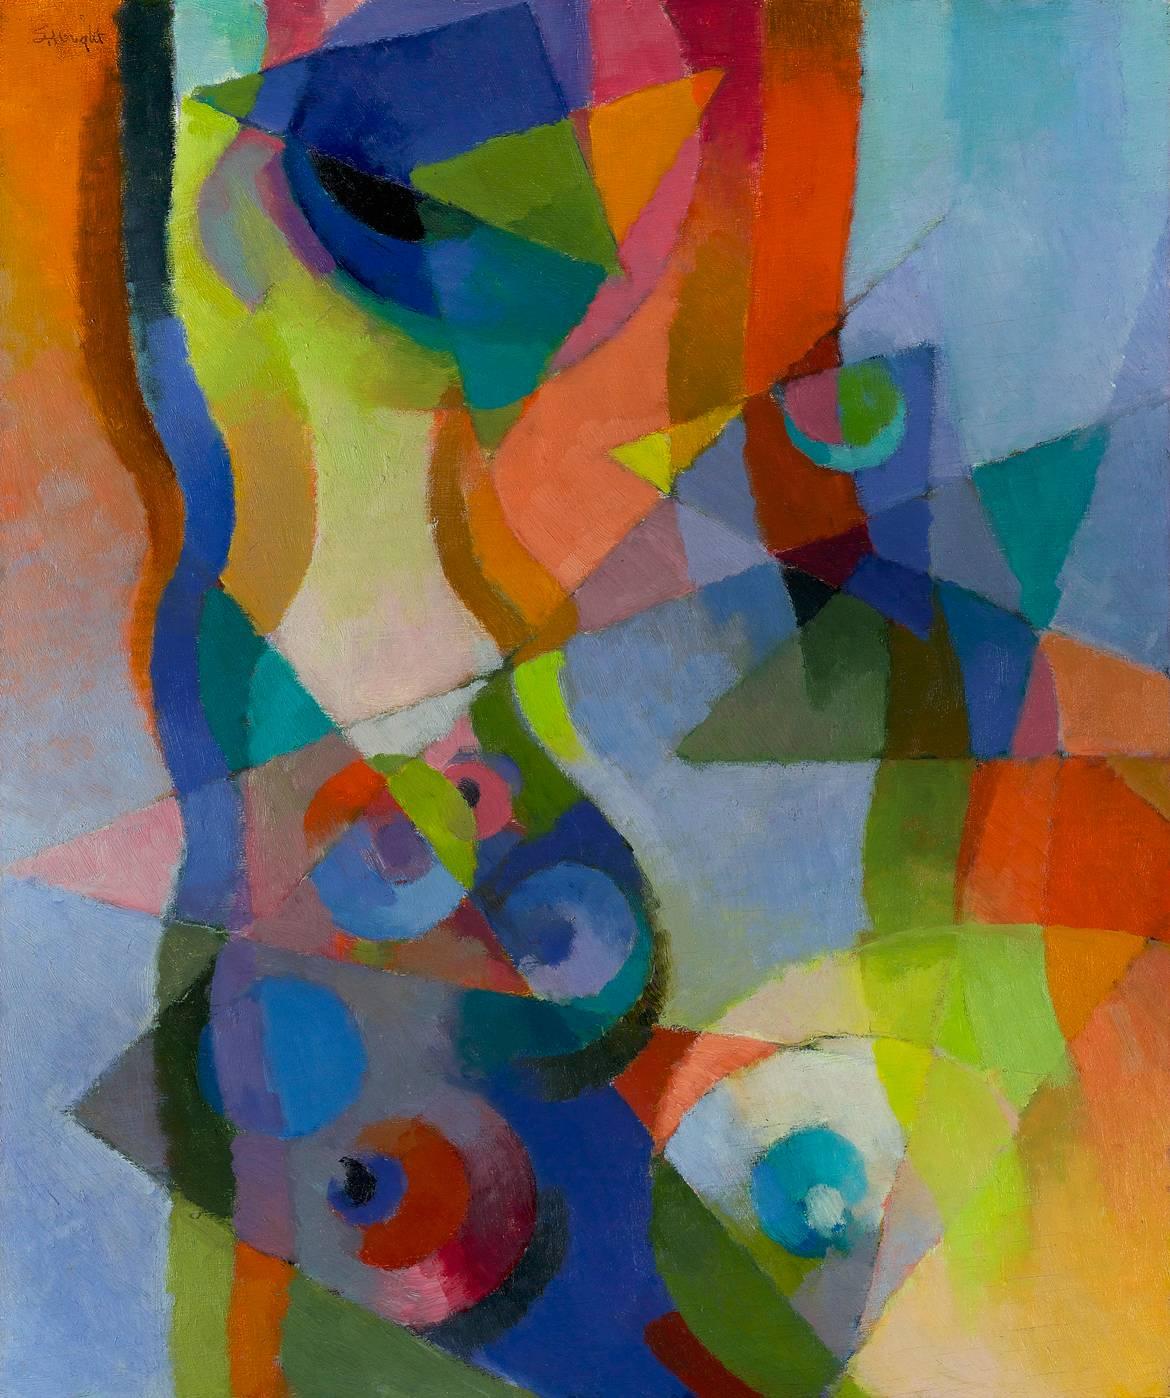 Stanton MacDonald-Wright Abstract Painting - Synchromy, Kyoto